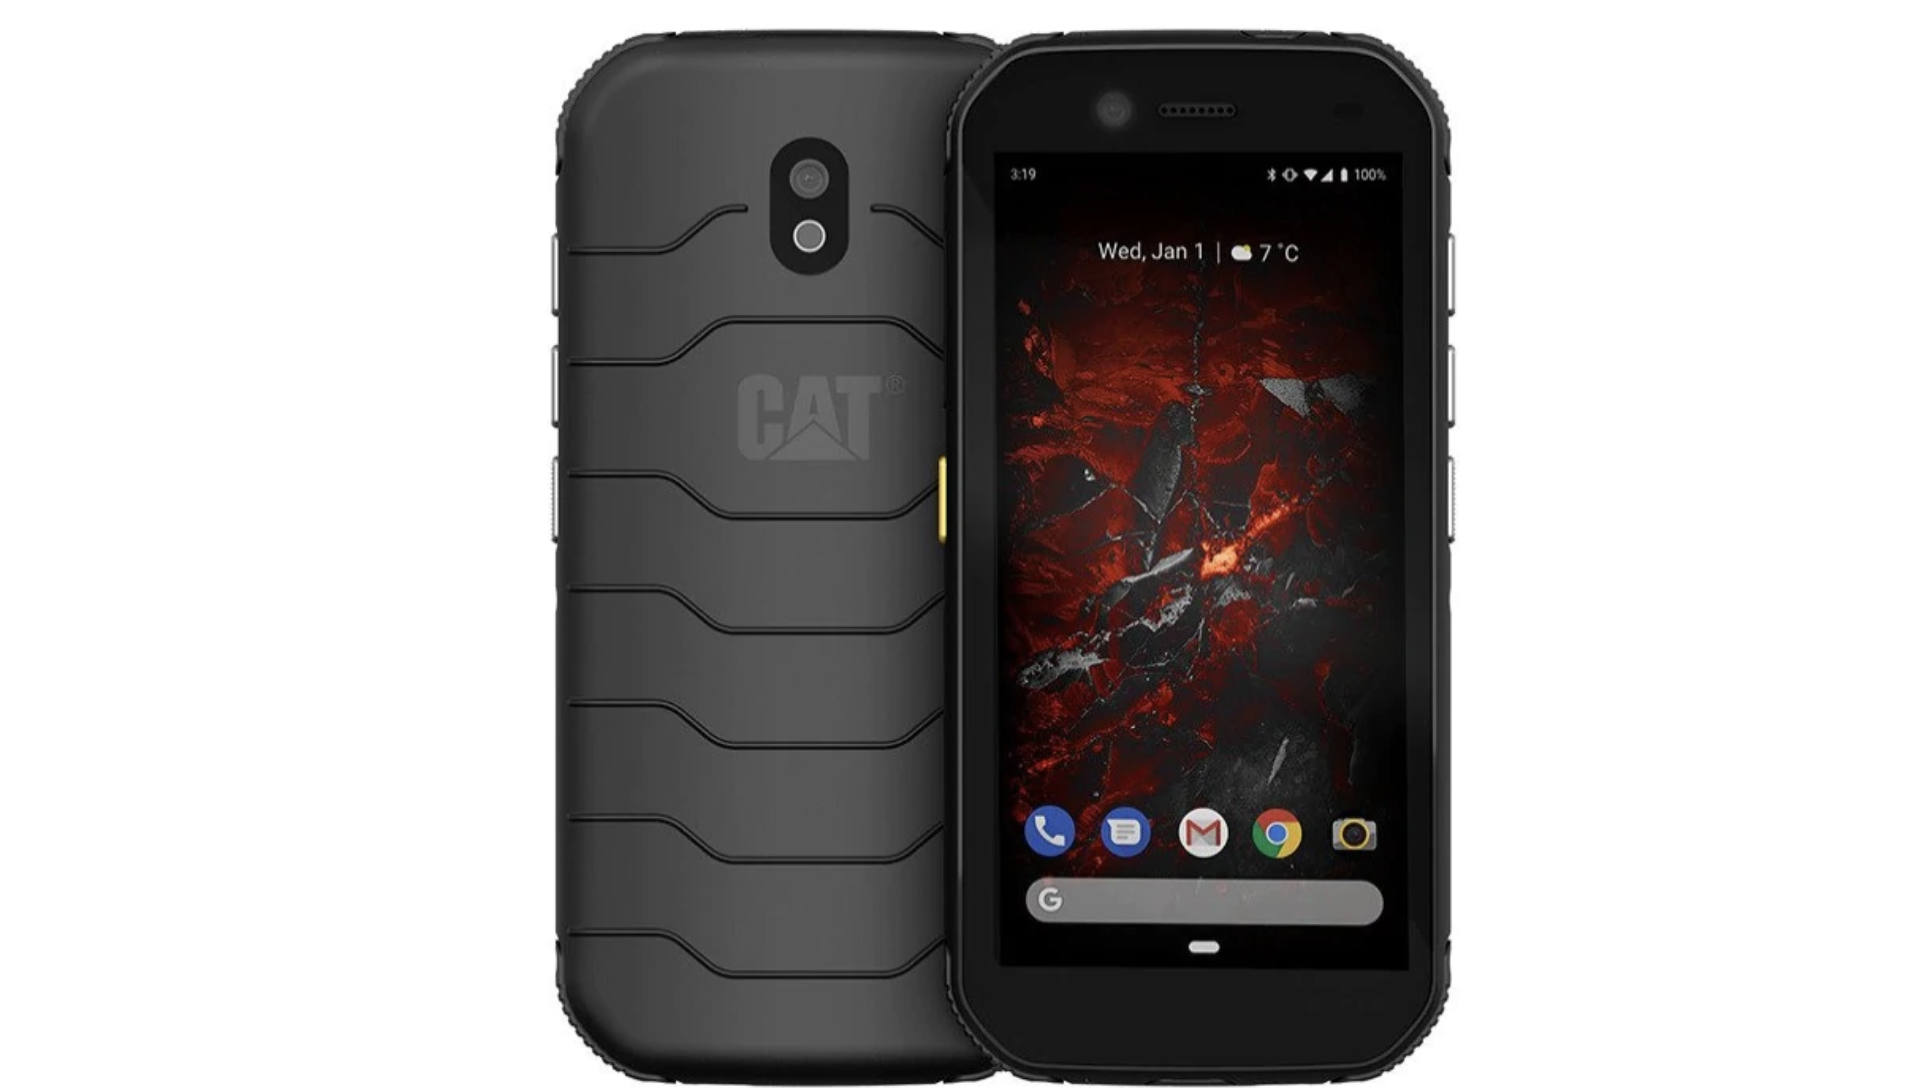  CAT  S32 rugged phone launched at CES 2021 Gadgets Now